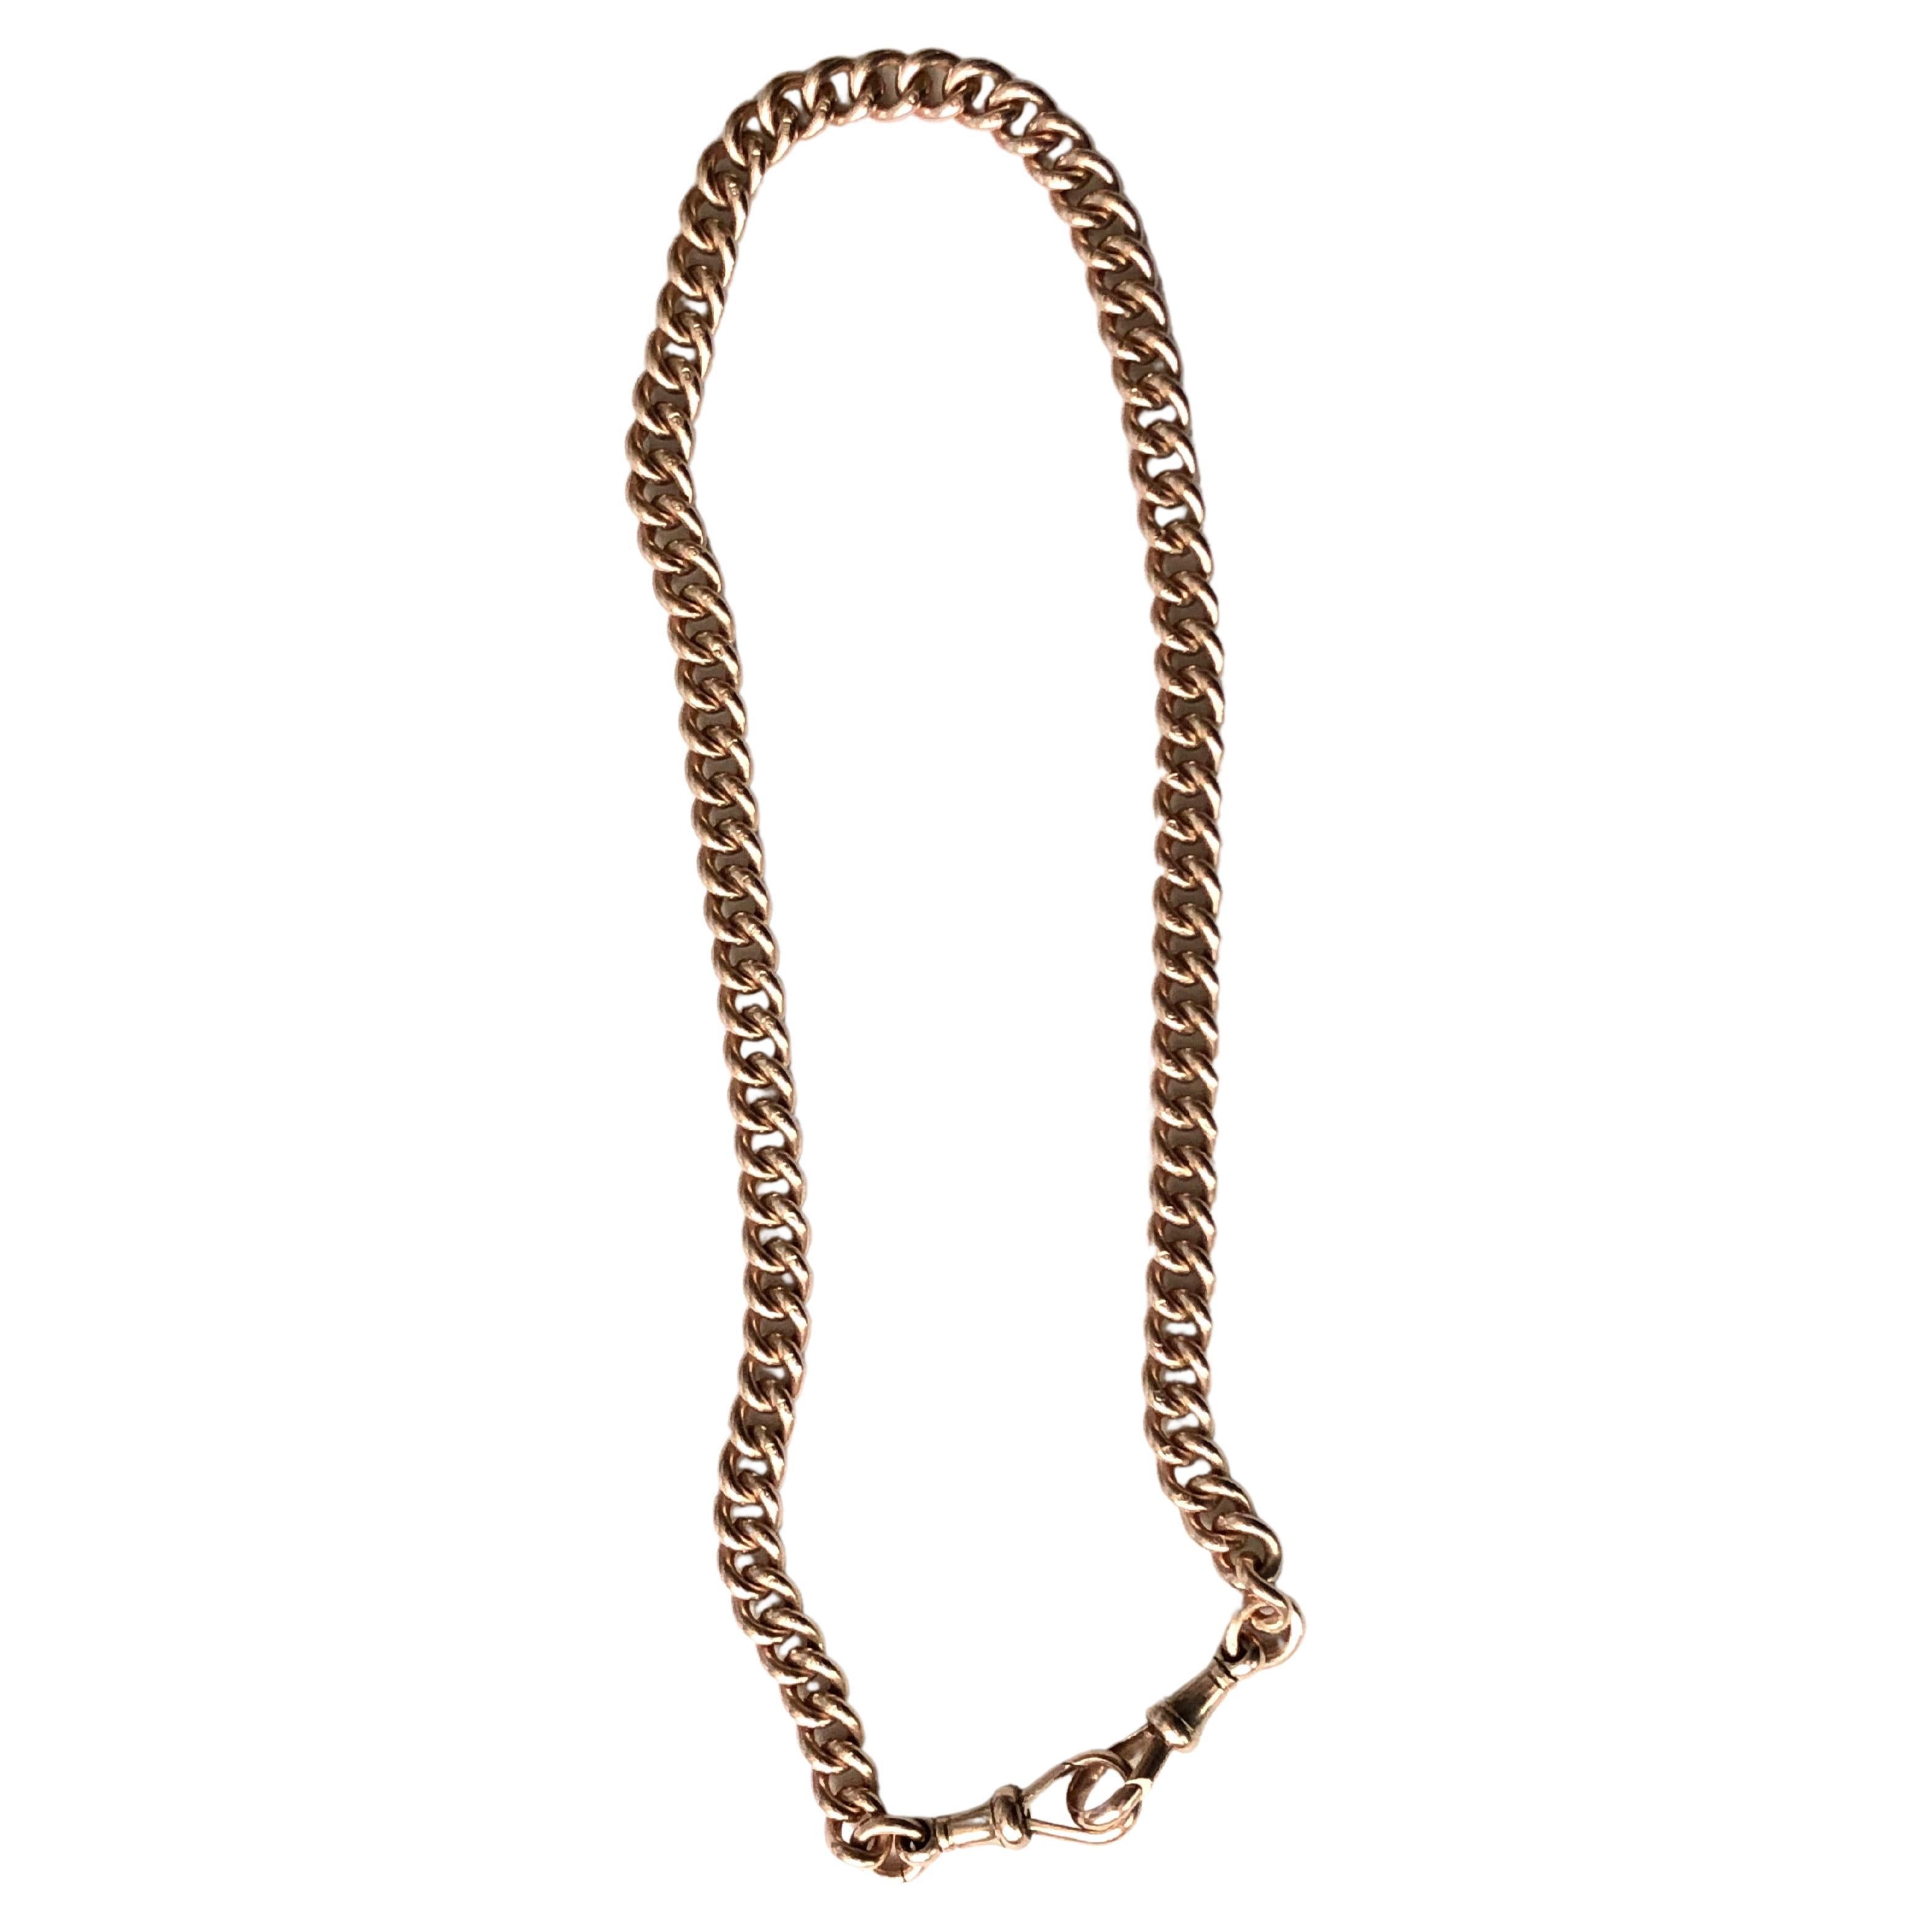 Vintage Fob Chain Hand Made in Solid Rose Gold